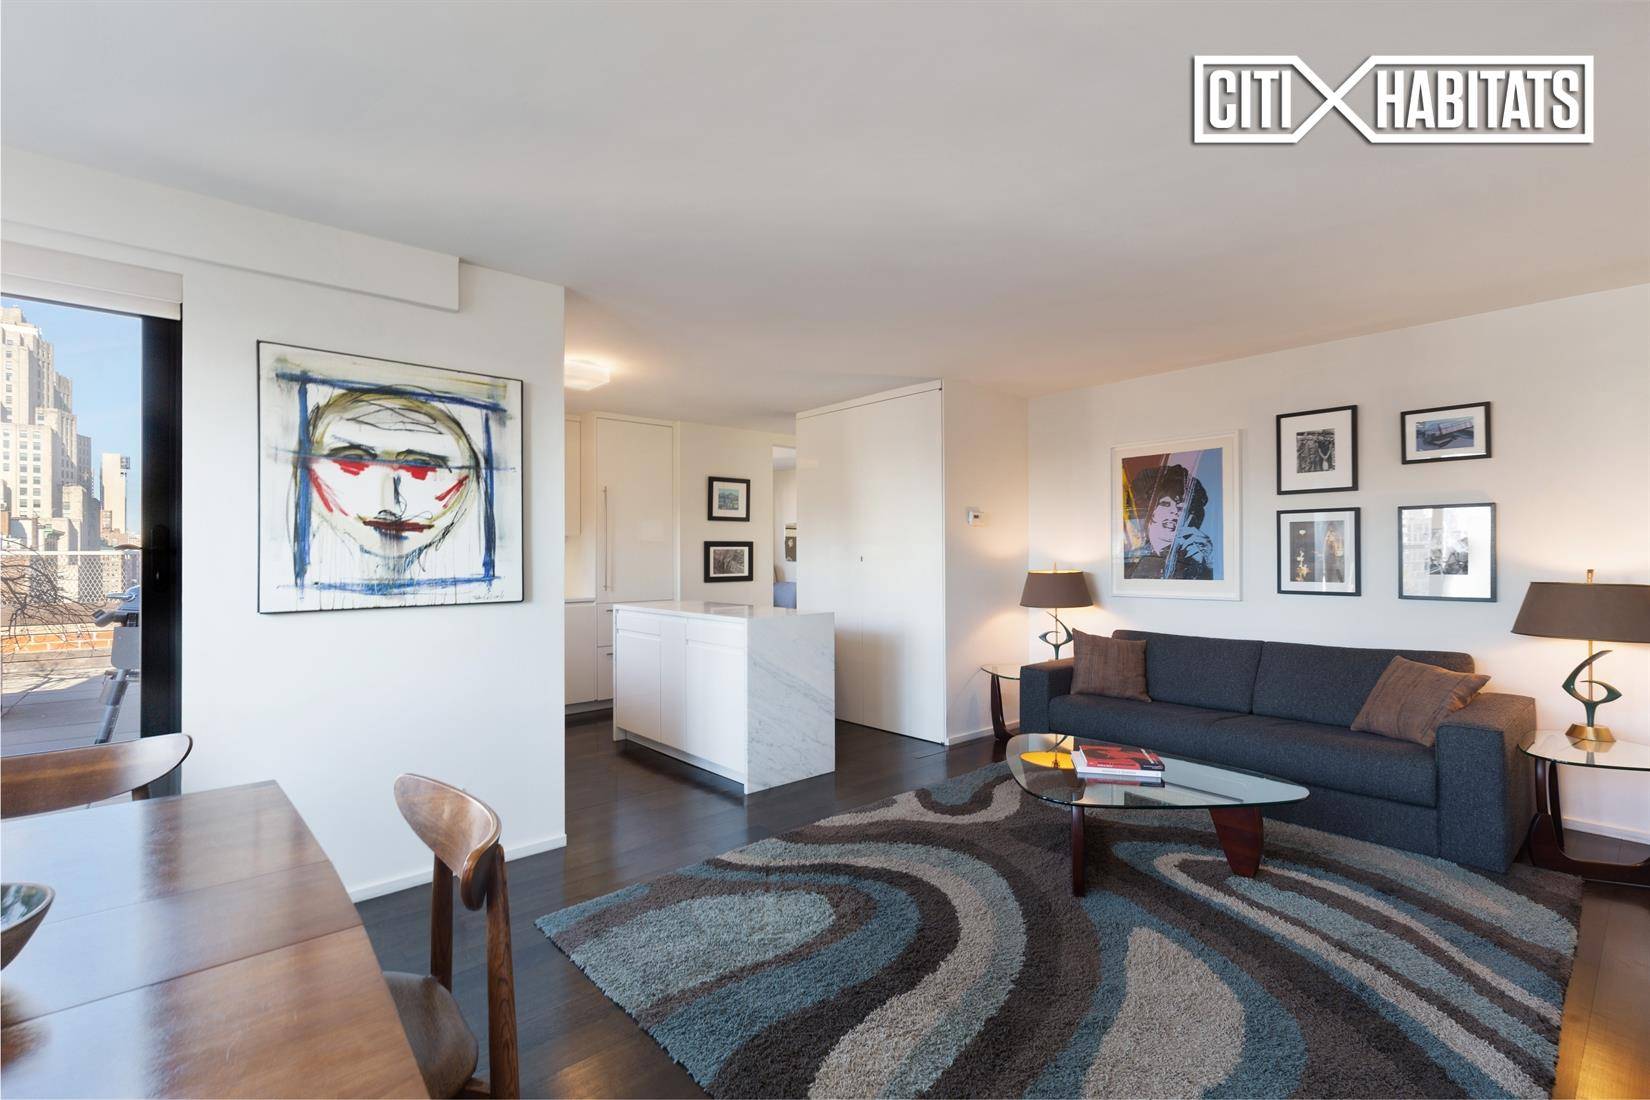 THE MANHATTAN LIFESTYLE YOUVE ALWAYS DREAMED OF light, views, impeccable finishes and an incomparable wrap around outdoor terrace for planting and enjoyment within this beautifully designed 2 2 SW corner ...